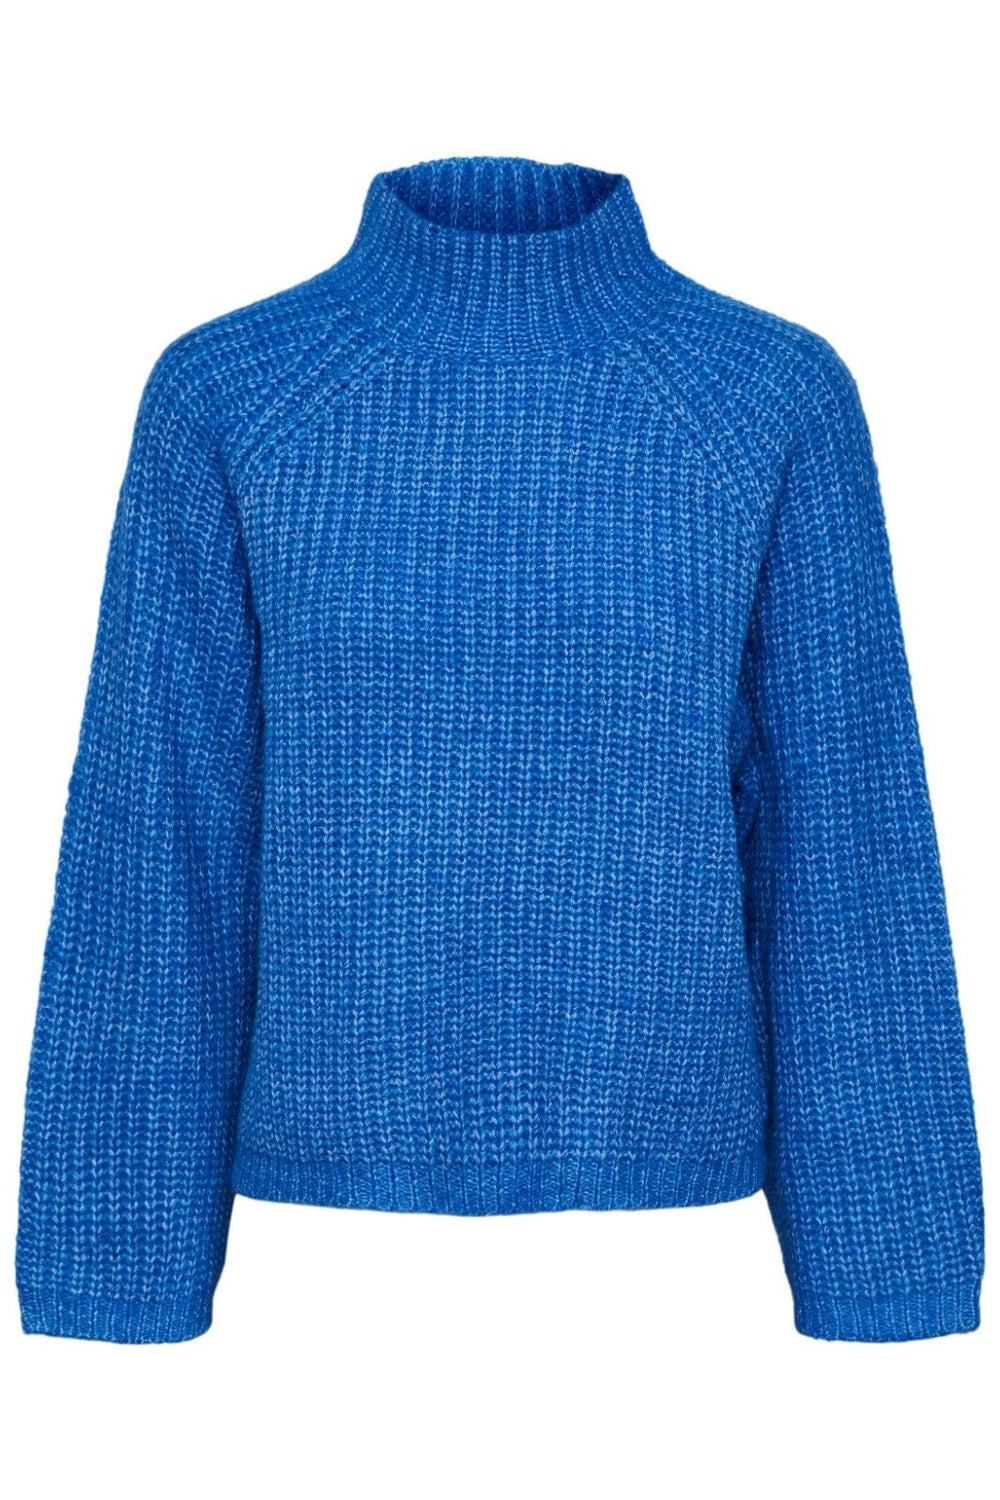 Pieces - Pcnell Ls High Neck Knit - 4259862 French Blue Strikbluser 